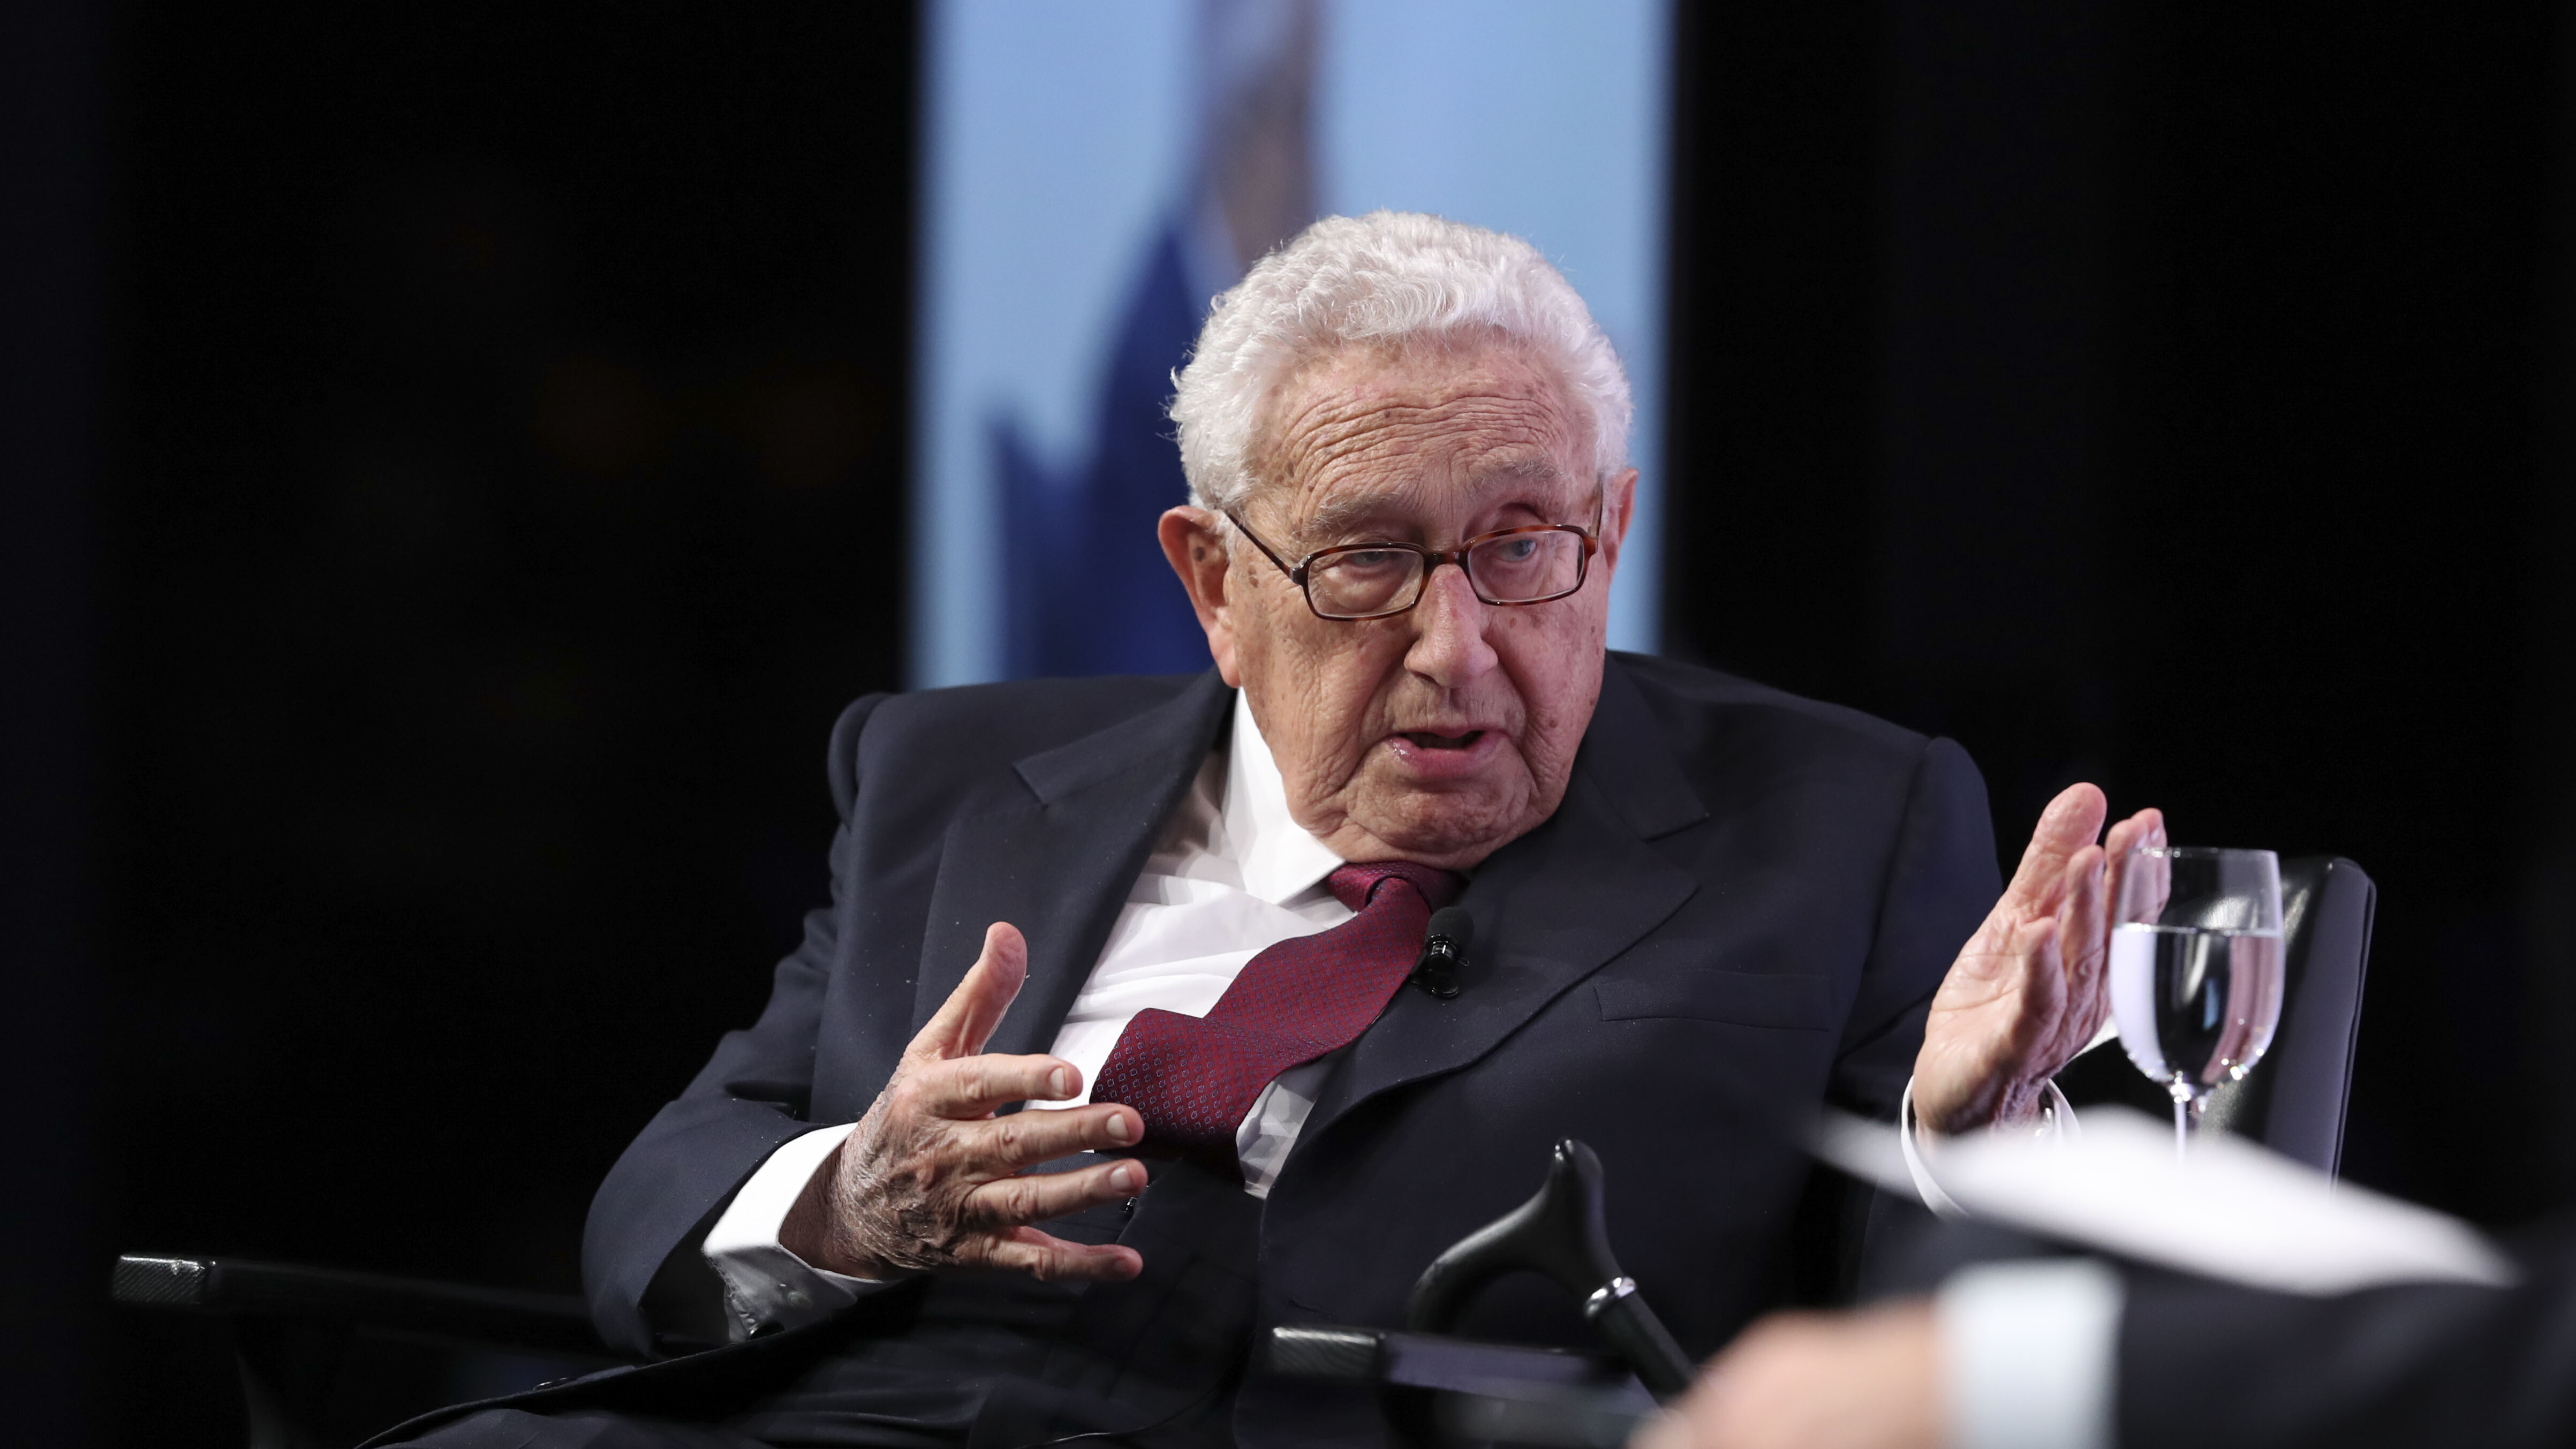 Henry Kissinger will be forever remembered for his significant role in shaping China-U.S. relations: American expert